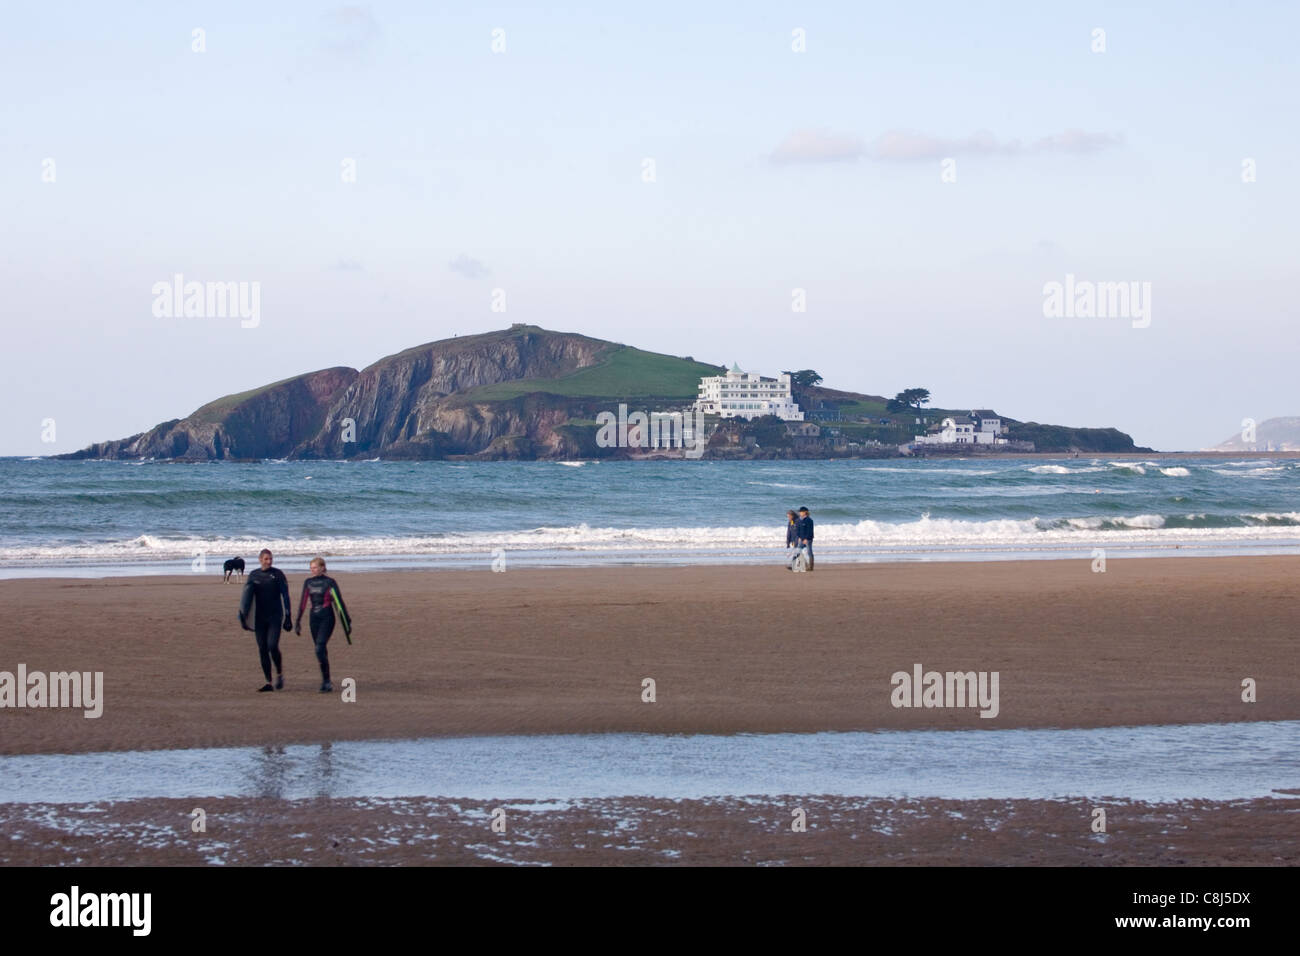 Bantham Beach High Resolution Stock Photography And Images Page 8 Alamy